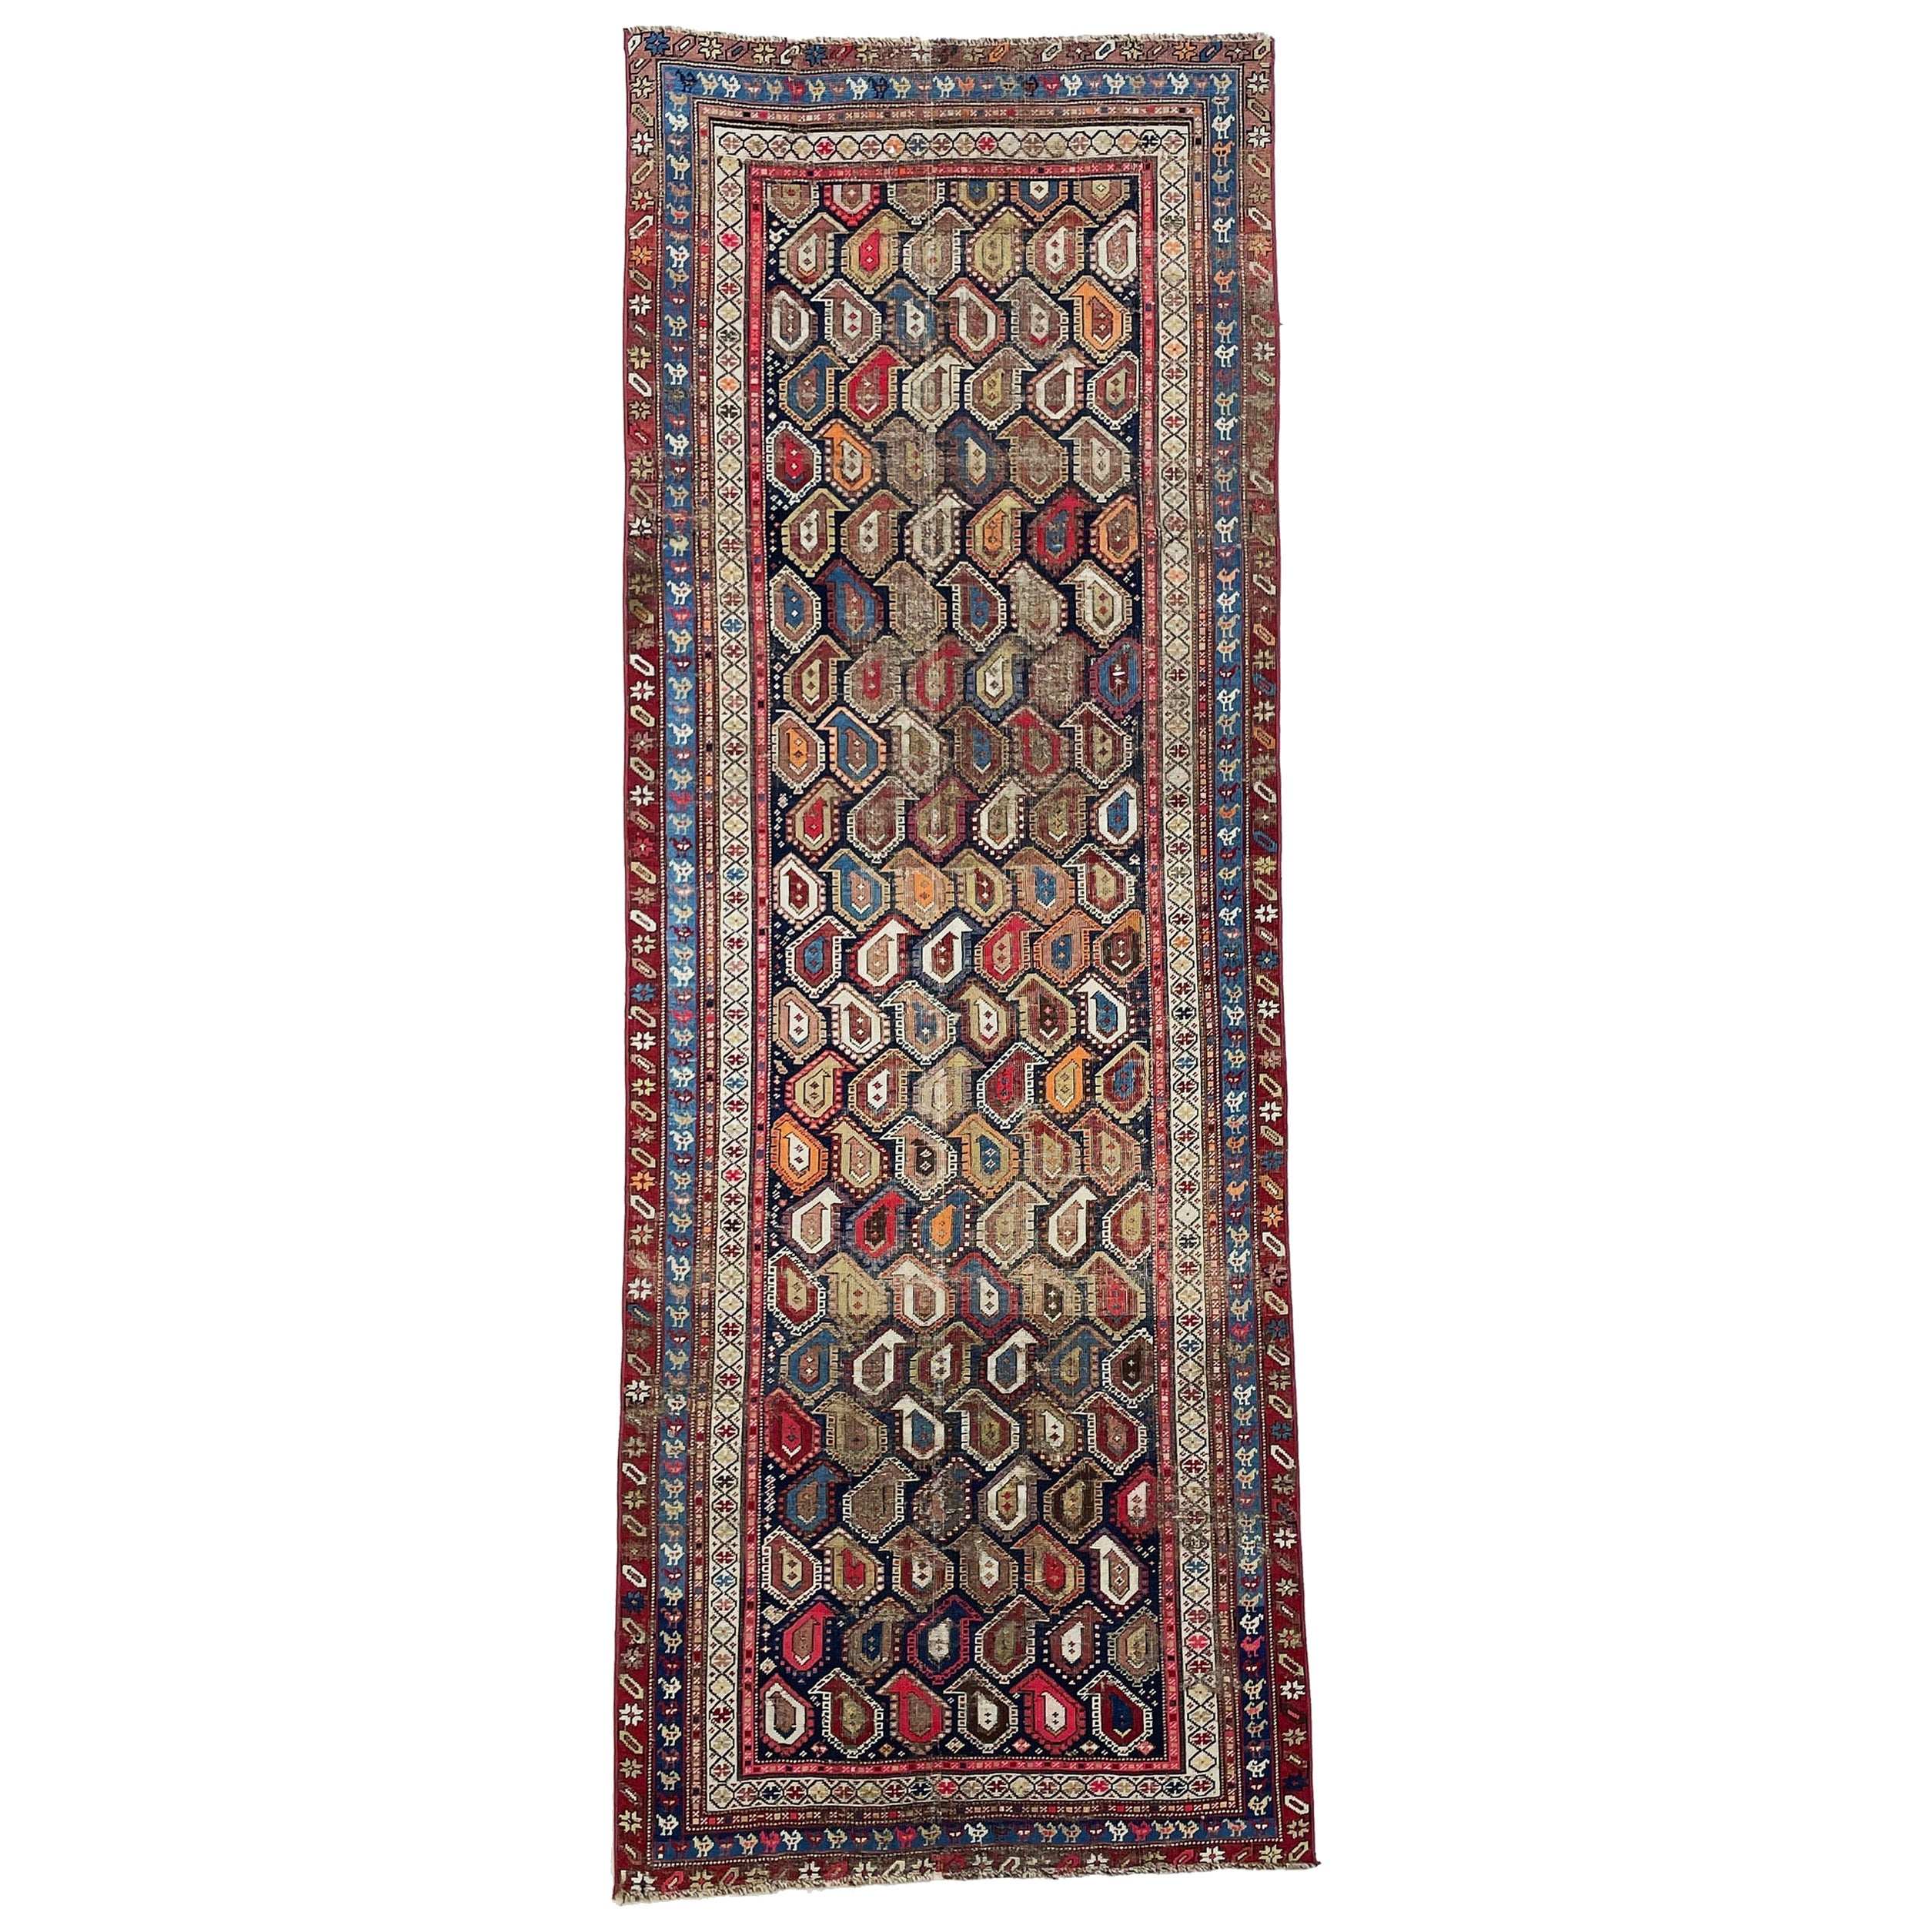 Artistic Antique Persian Runner with All-Over Interlocking-Boteh/Paisley Design  For Sale